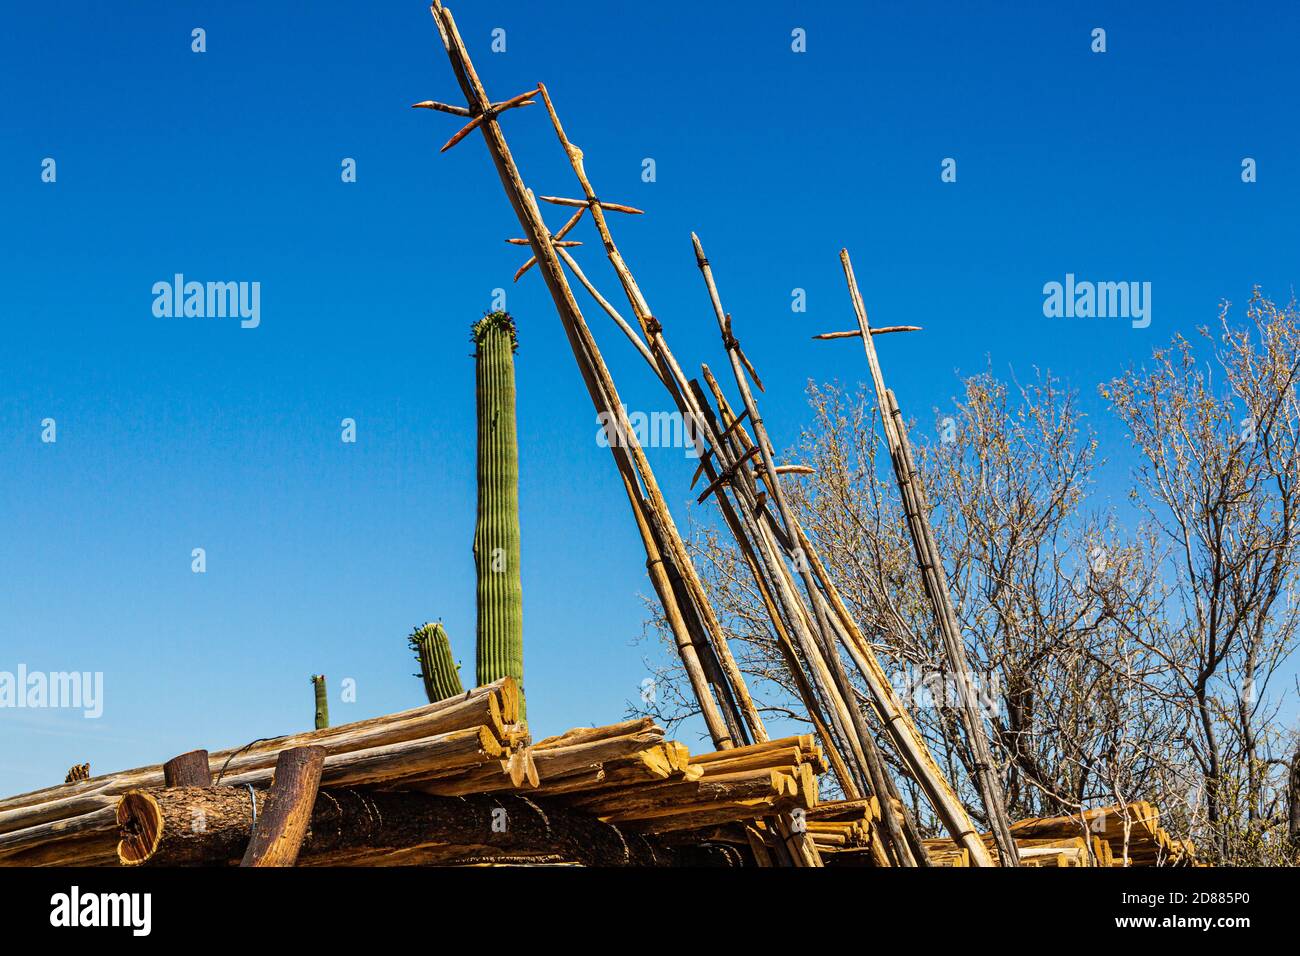 These Ku’ipad (saguaro ribs with cross members) are used to harvest saguaro fruit in a traditional harvest by the Tohono O’odham.(a Native American pe Stock Photo